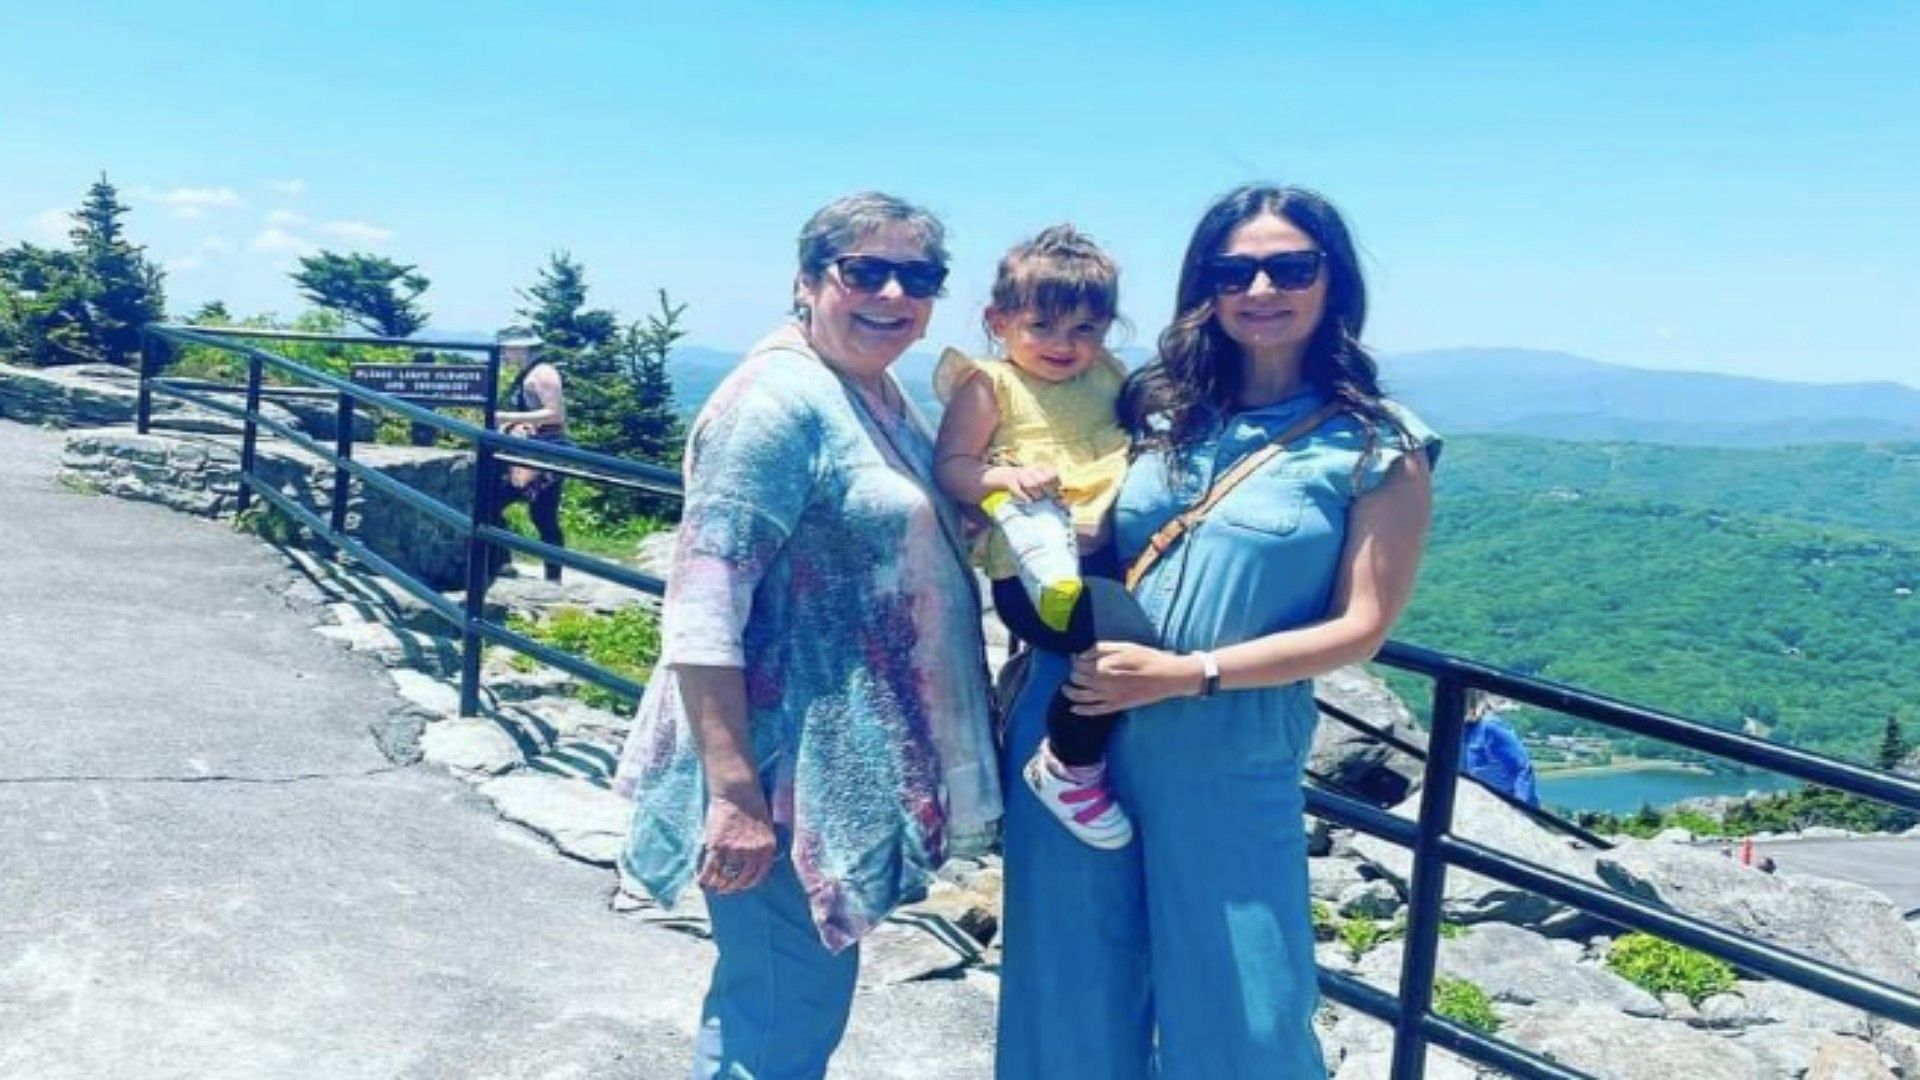 Barbara Rumpel (L) standing beside her grandchild and daughter (Image via Marge/Twitter)